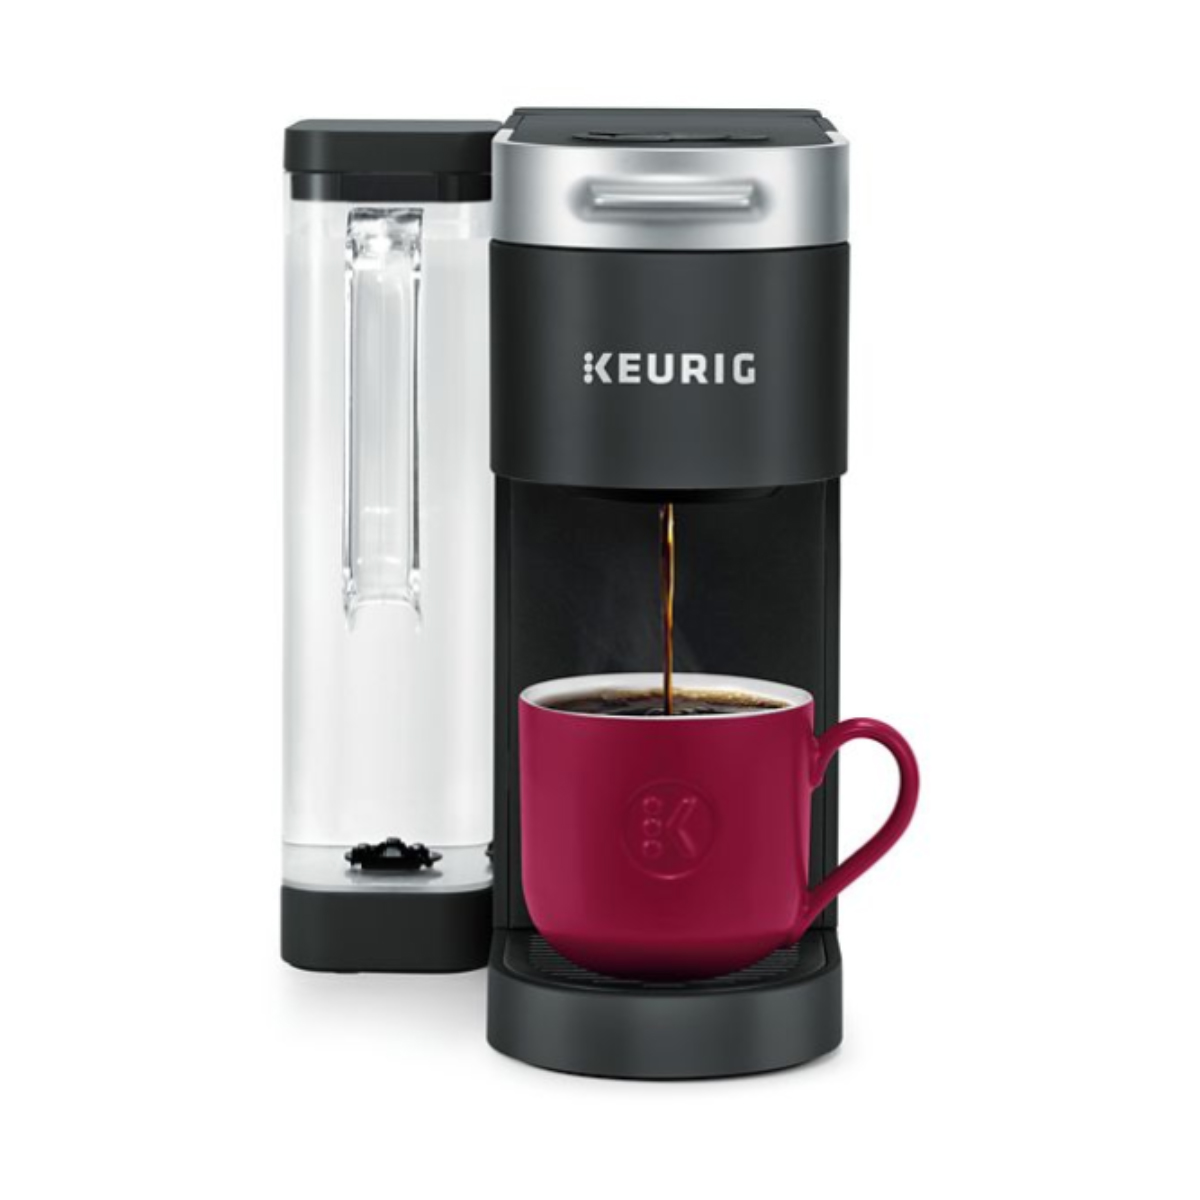 & 2.0 YOU PICK YOUR PART FROM MENU Keurig k60 black parts red 